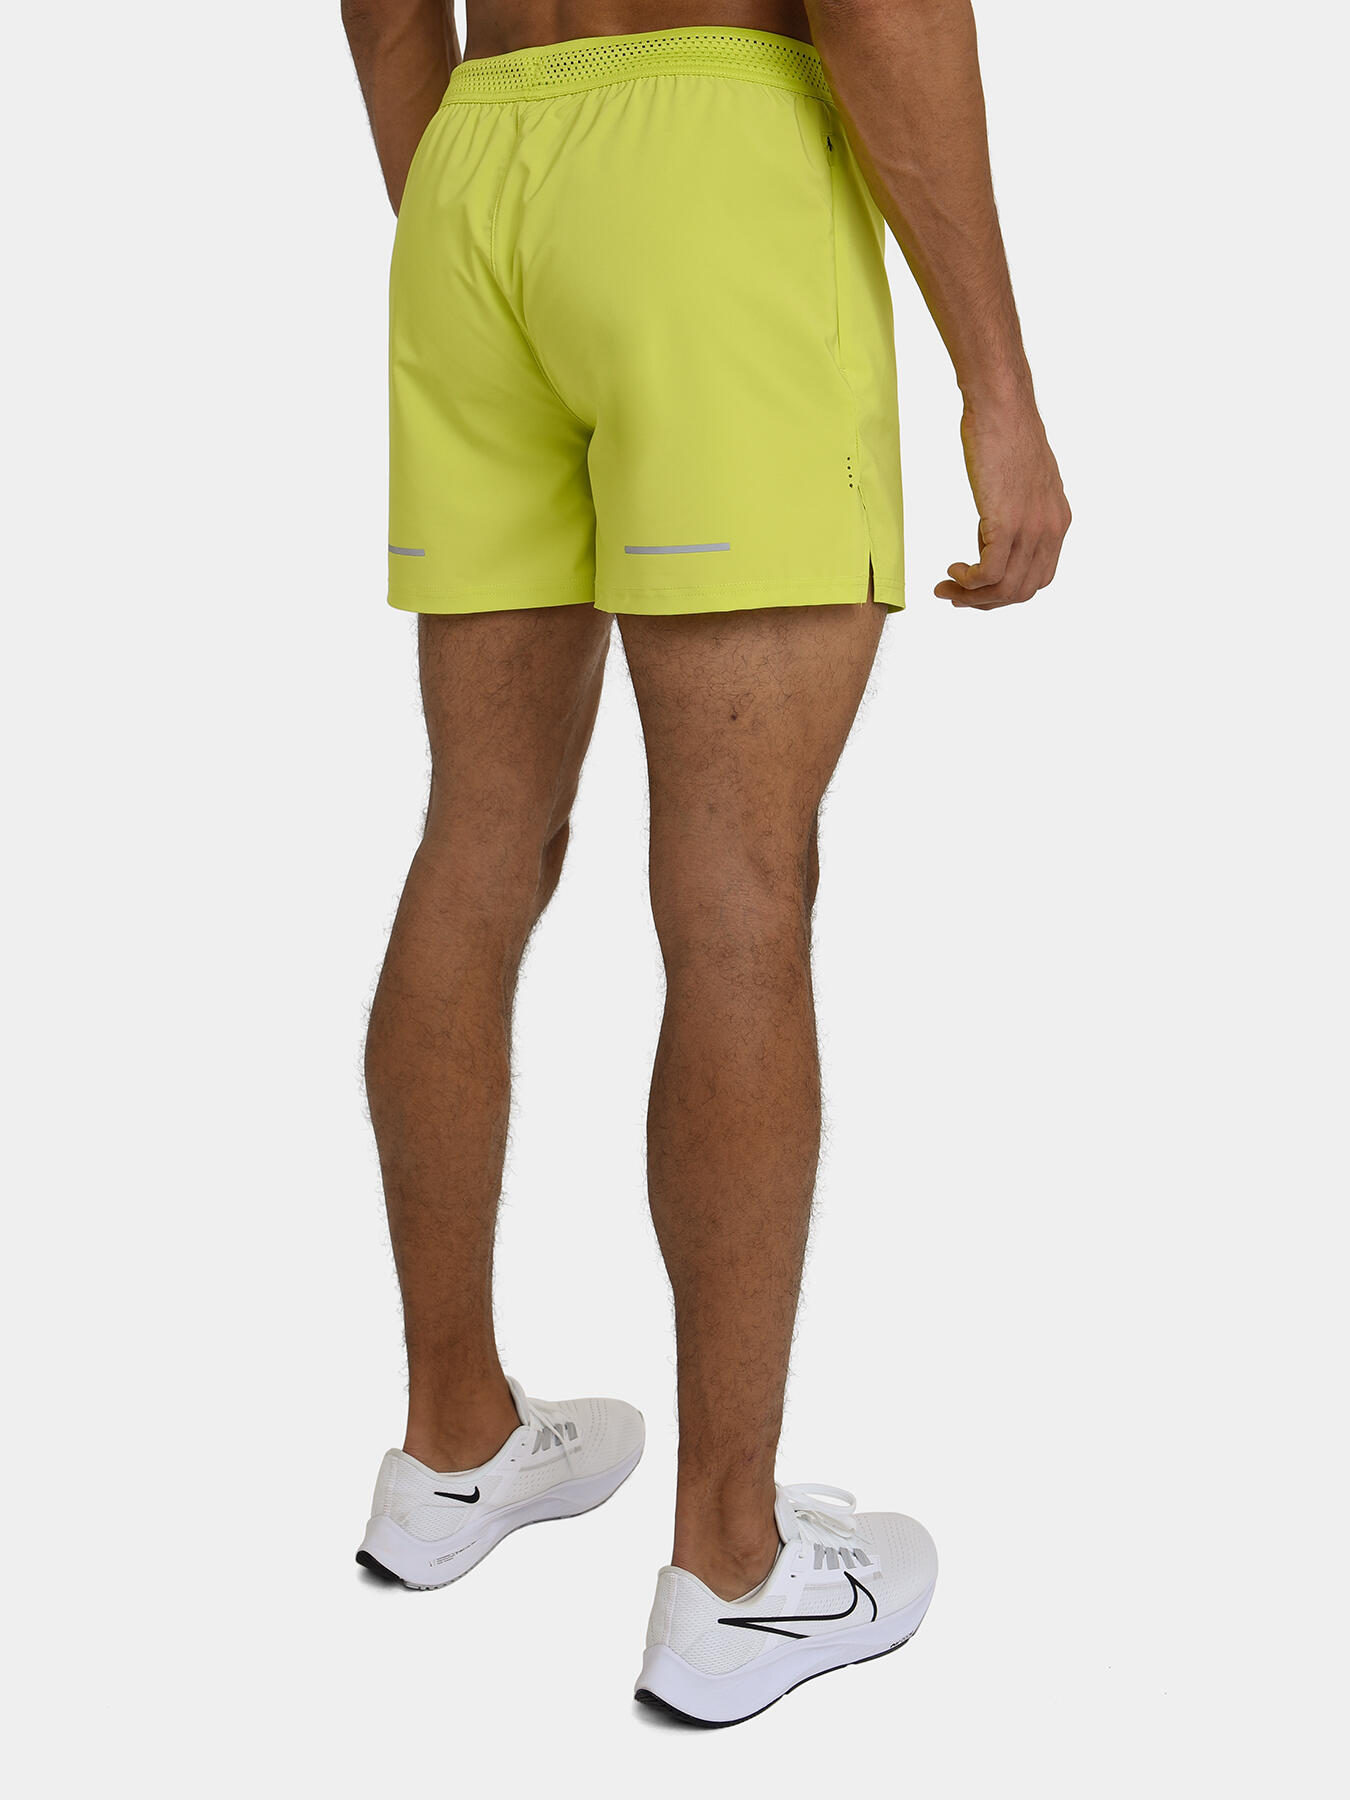 Men's Flyweight Running Shorts with Zipped Pockets - Lime Punch 2/5